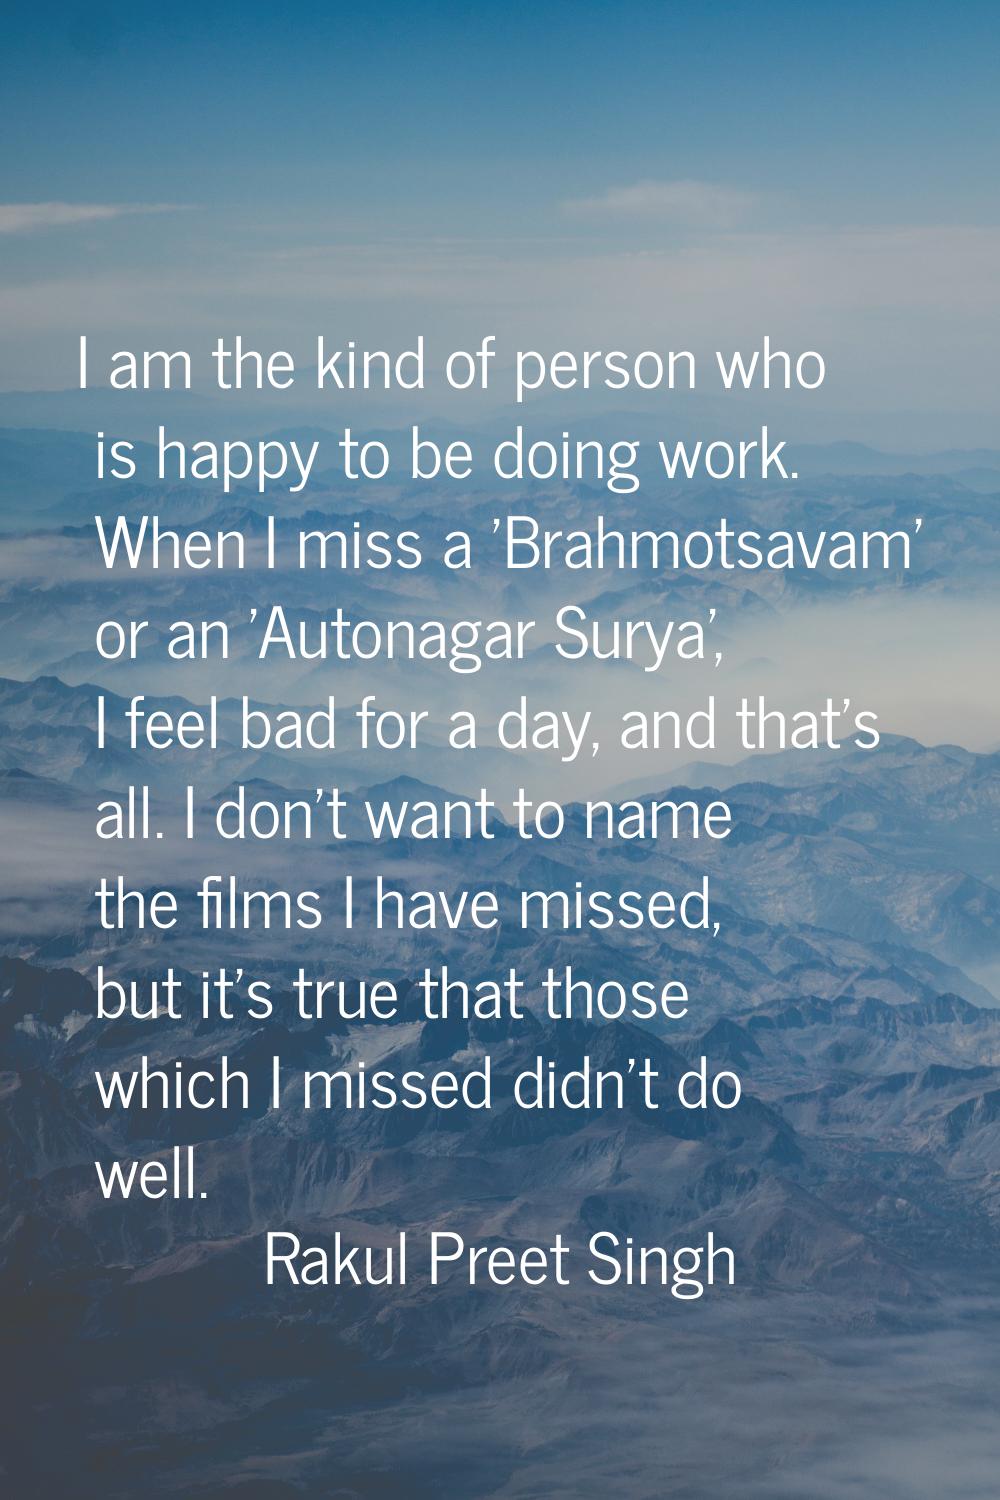 I am the kind of person who is happy to be doing work. When I miss a 'Brahmotsavam' or an 'Autonaga